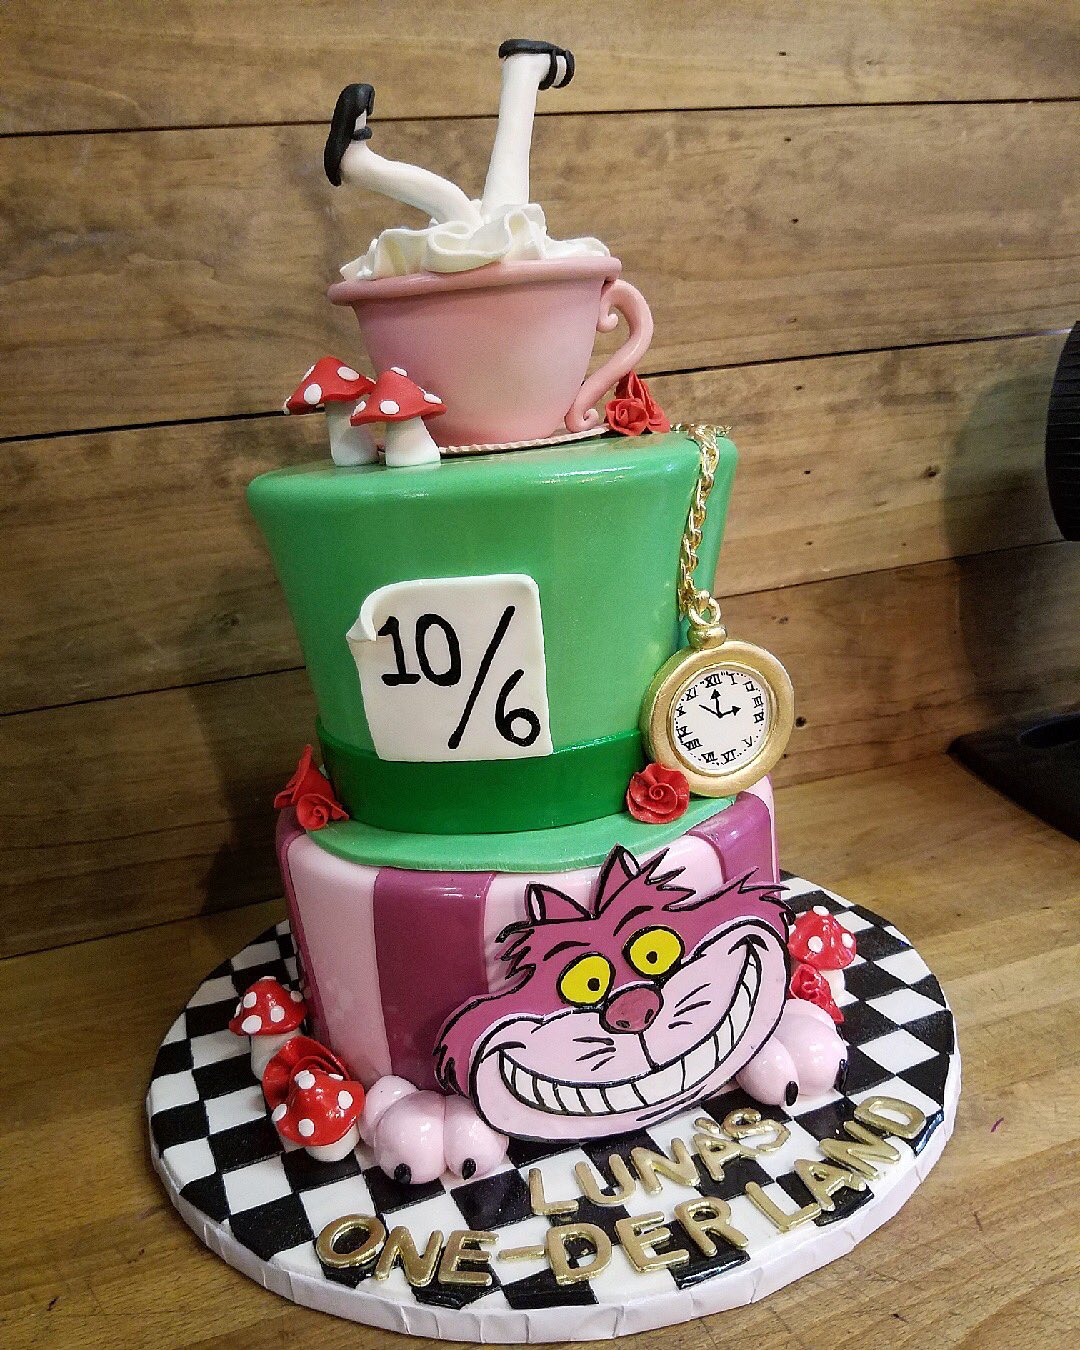 Thorny Påstand Rund ned Sweet T's Bakeshop Twitterissä: "Alice in Wonderland themed first birthday  cake with the #CheshireCat in bottom tier and the mad hatter's hat 🎩 as  the top tier! Sculpted tea cup 🍵 on